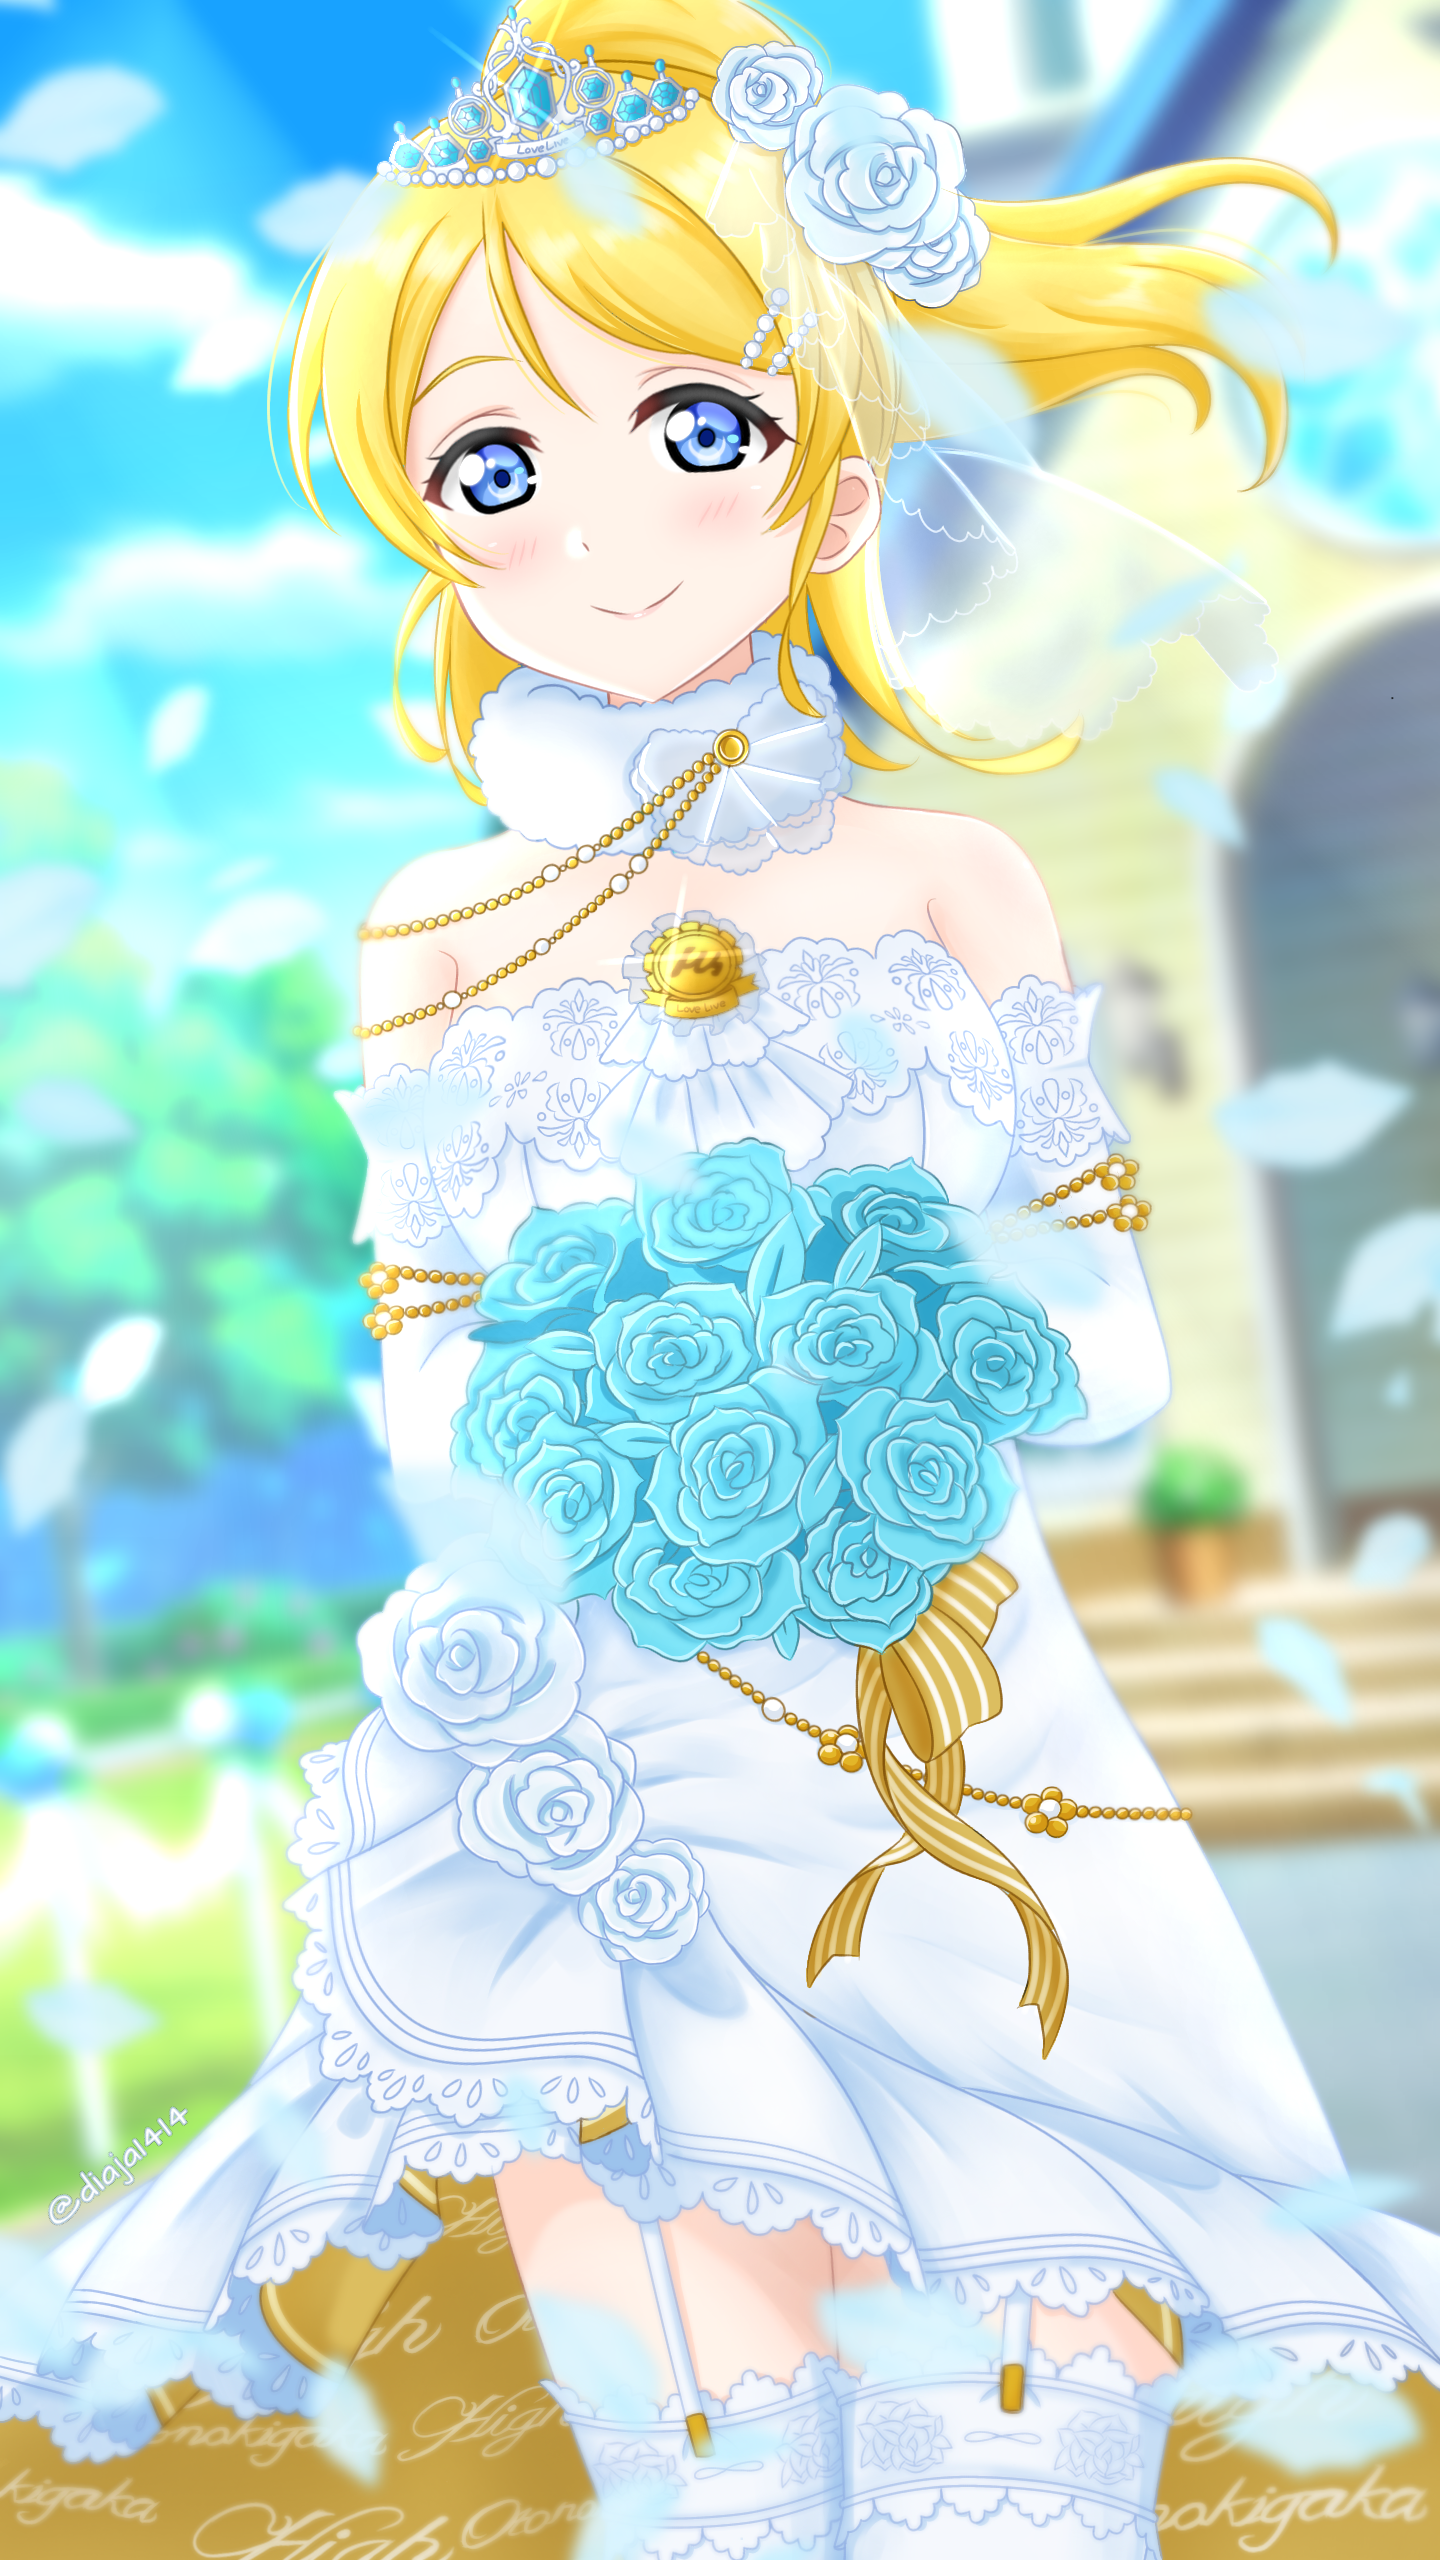 Ayase. See? She is too adorable. I kind of want her and Shu to be a couple.